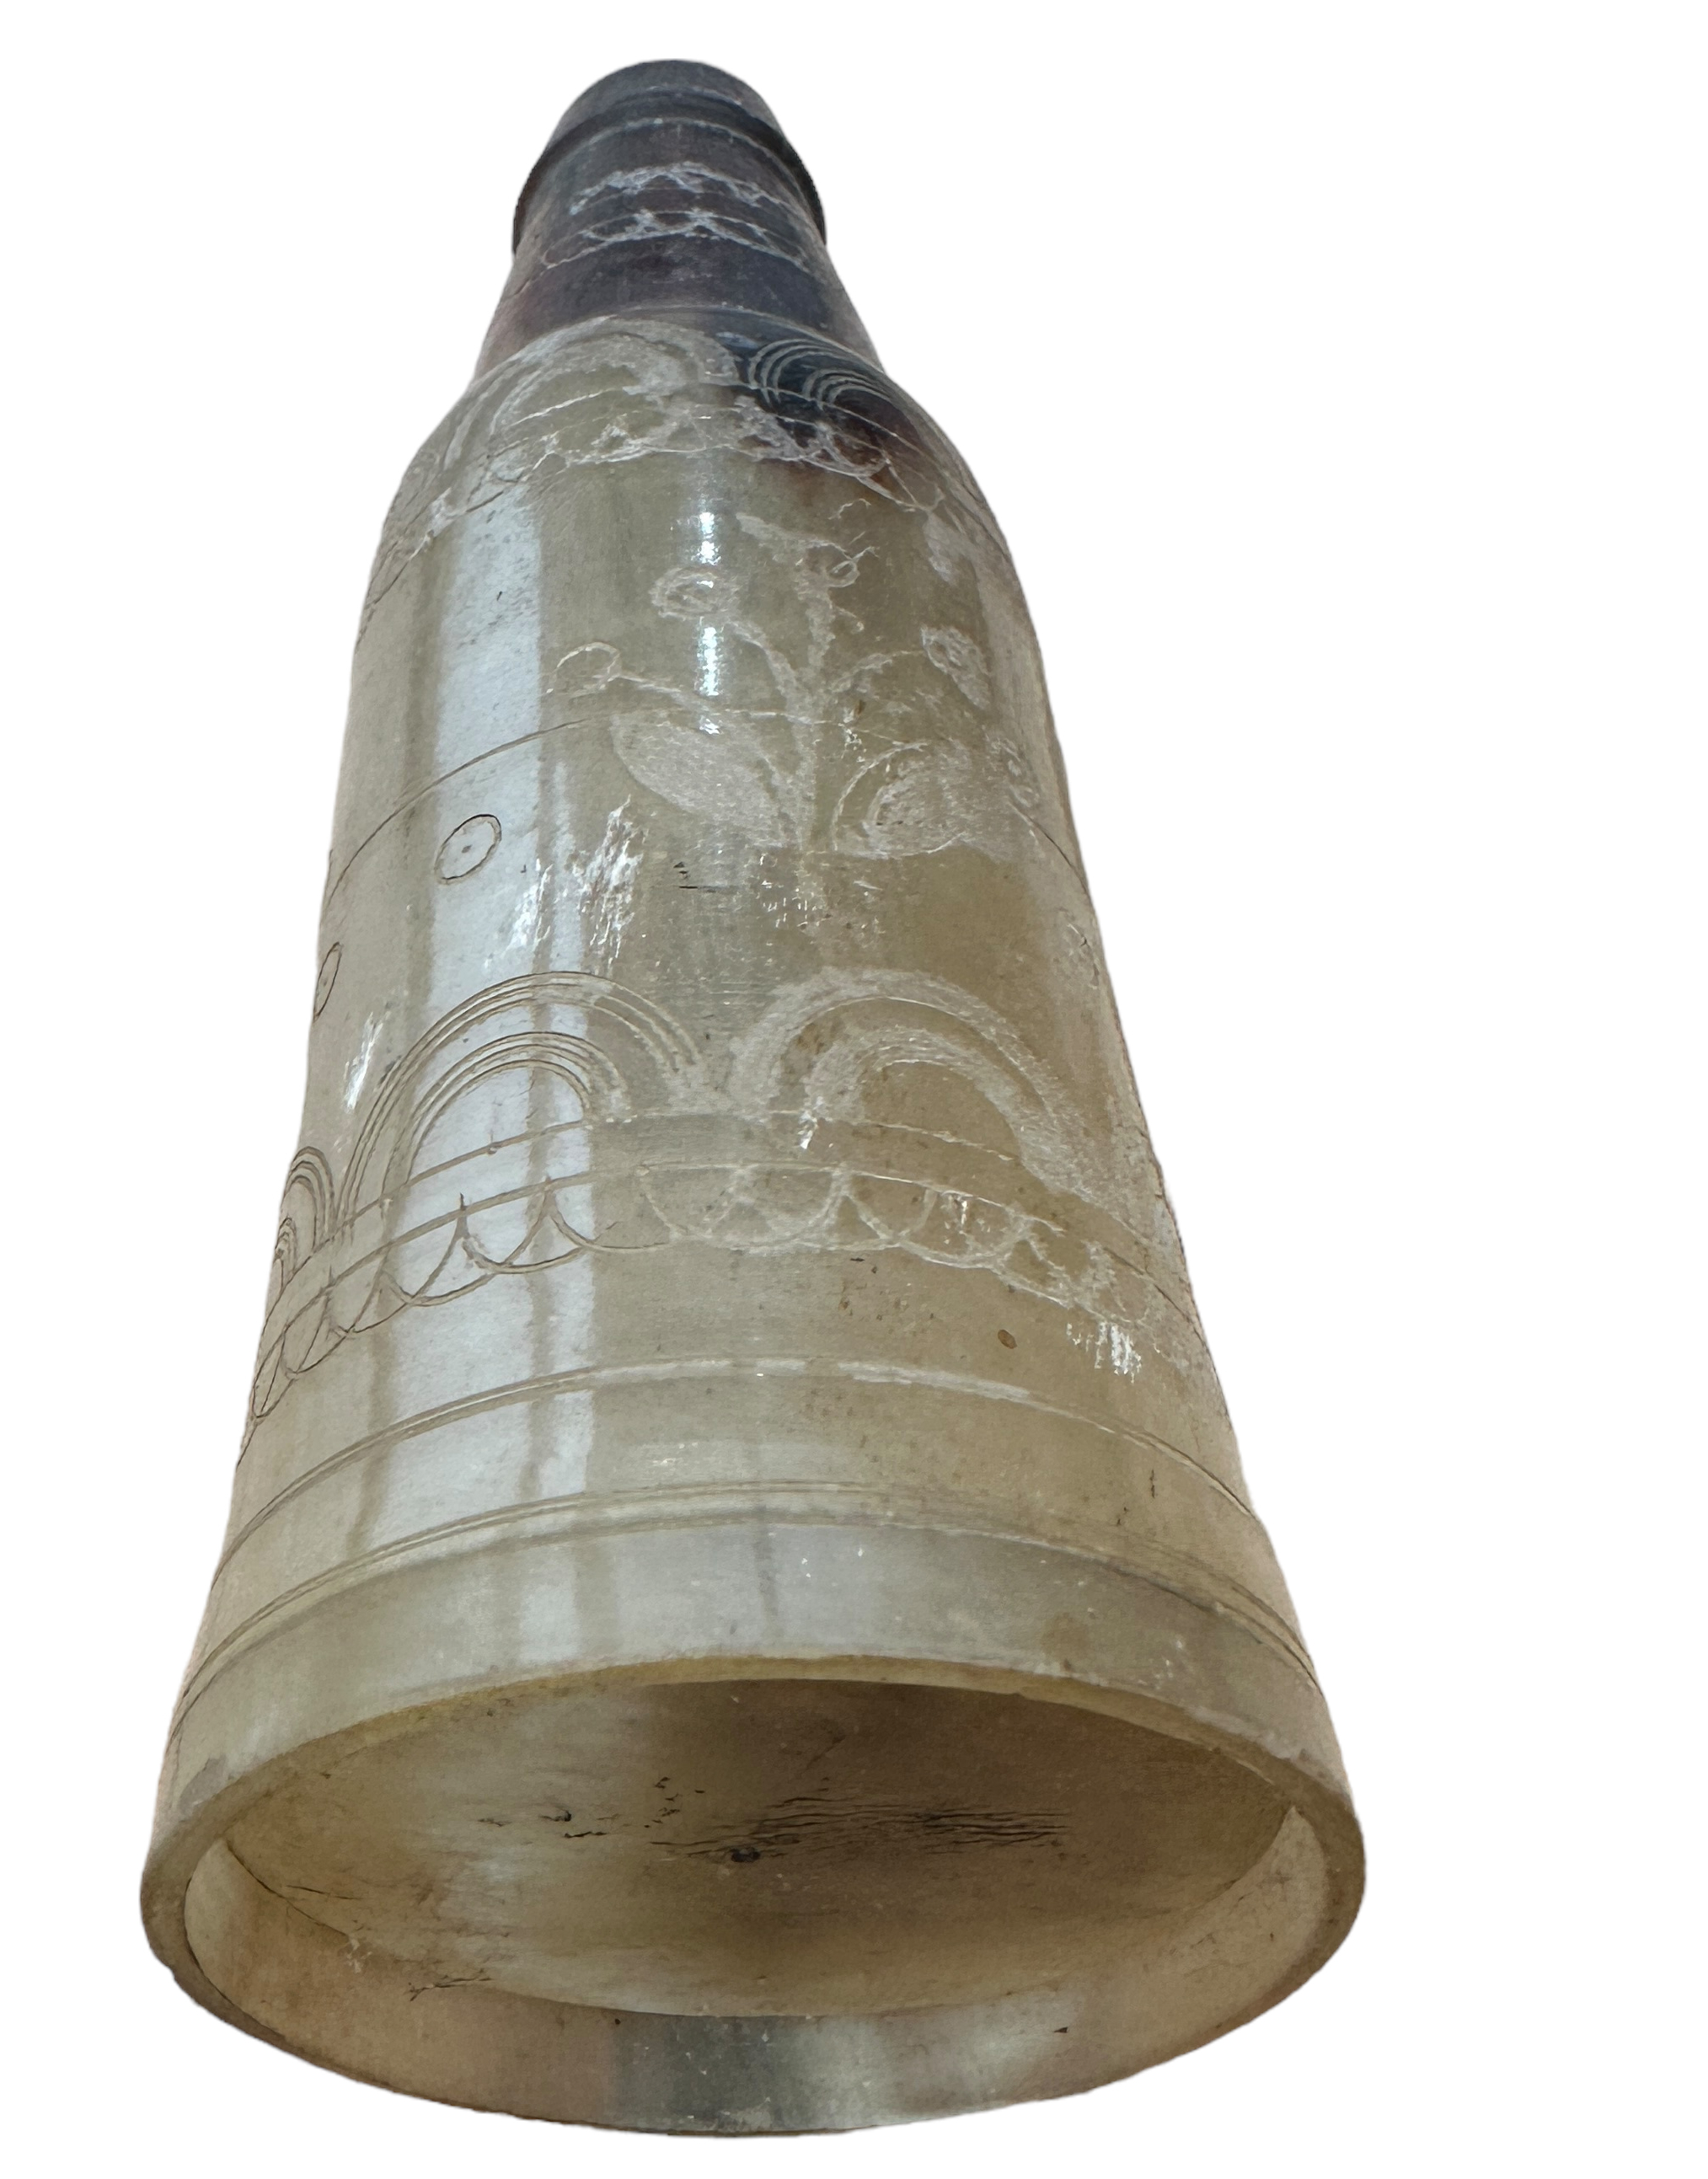 Antique Decorated Horn Bottle - 6 3/8" tall and 2 3/16" diameter at the base. - Image 2 of 4